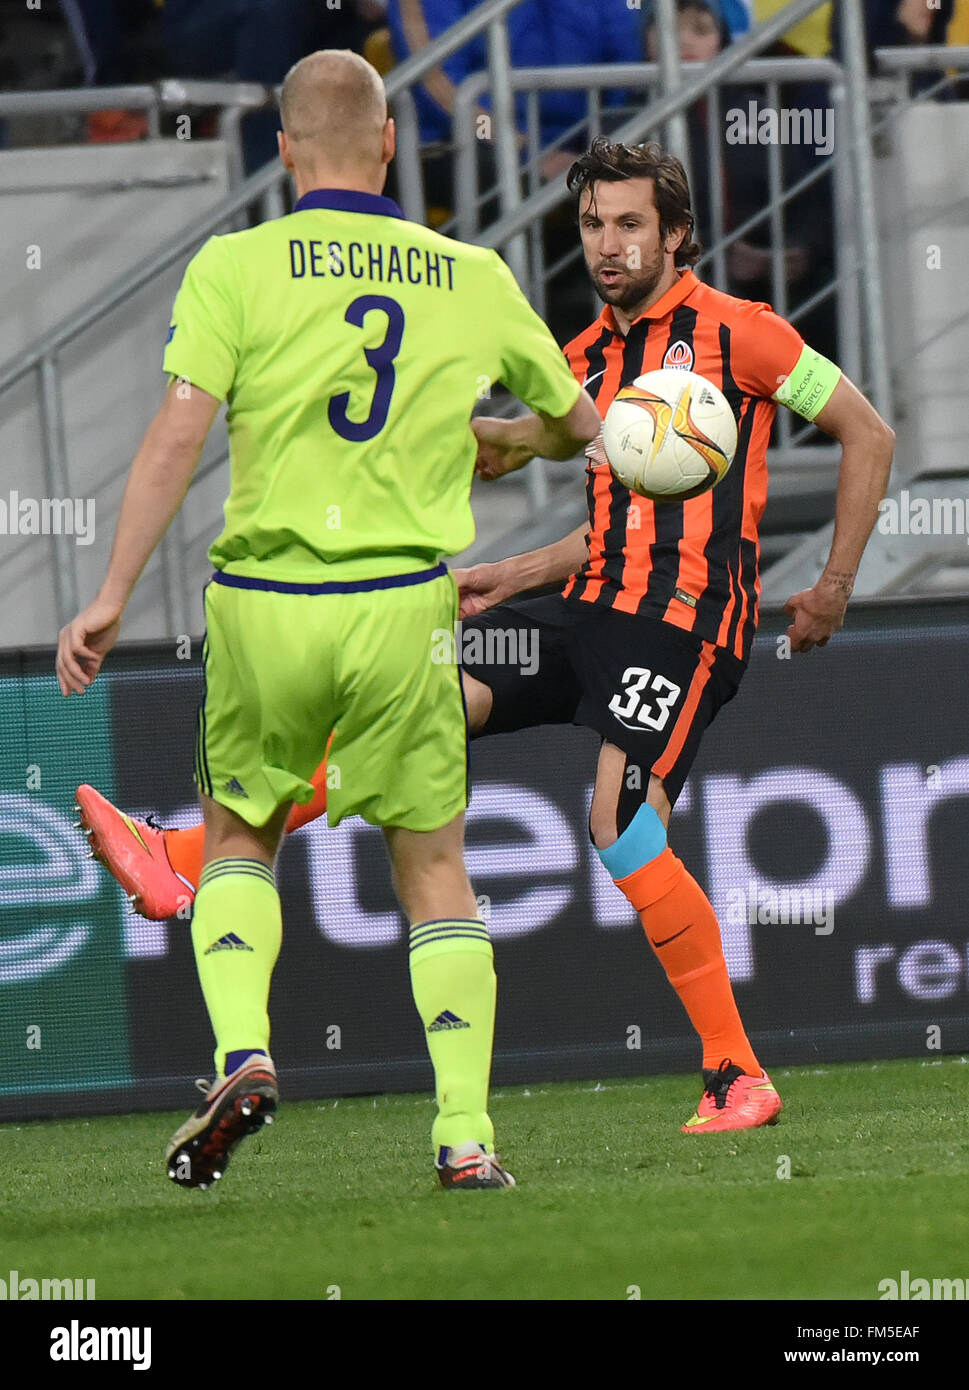 Lviv, Ukraine. 10th March, 2016. Olivier Deschacht (L) of Anderlecht vies for the ball with Darijo Srna (R) of Shakhtar during the UEFA Europa League round of 16, first leg soccer match between Shakhtar Donetsk and Anderlecht at the Arena Lviv stadium in Lviv, Ukraine, 10 March 2016. Credit:  Mykola Tys/Alamy Live News Stock Photo